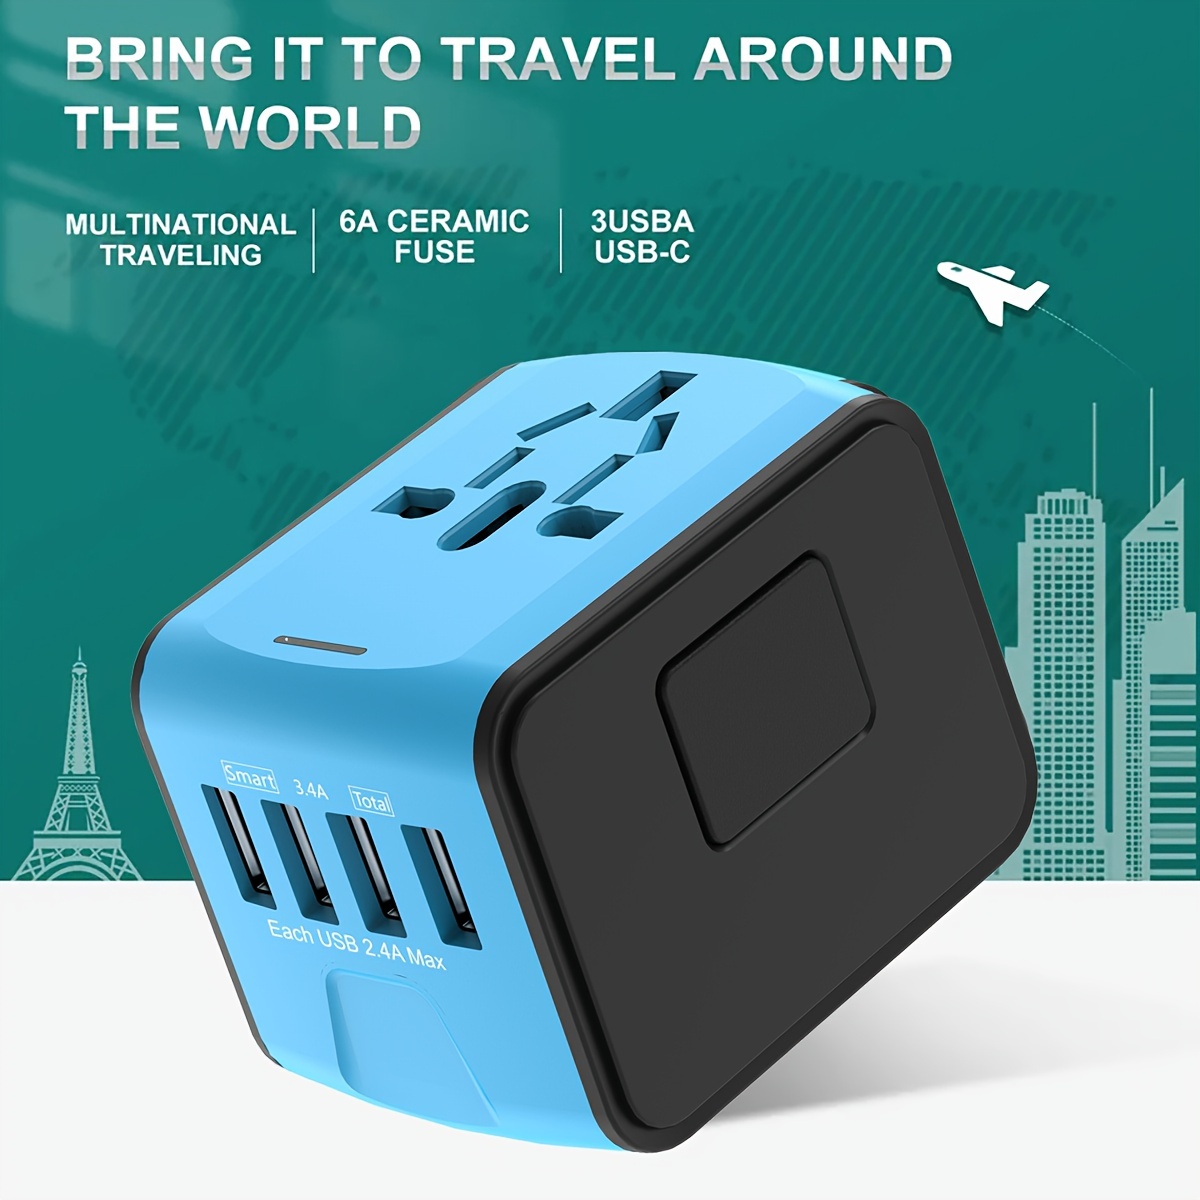 International Travel Adapter Universal Power Adapter Worldwide All in One 4  USB Perfect for European US, EU, UK, AU 160 Countries (Blue)